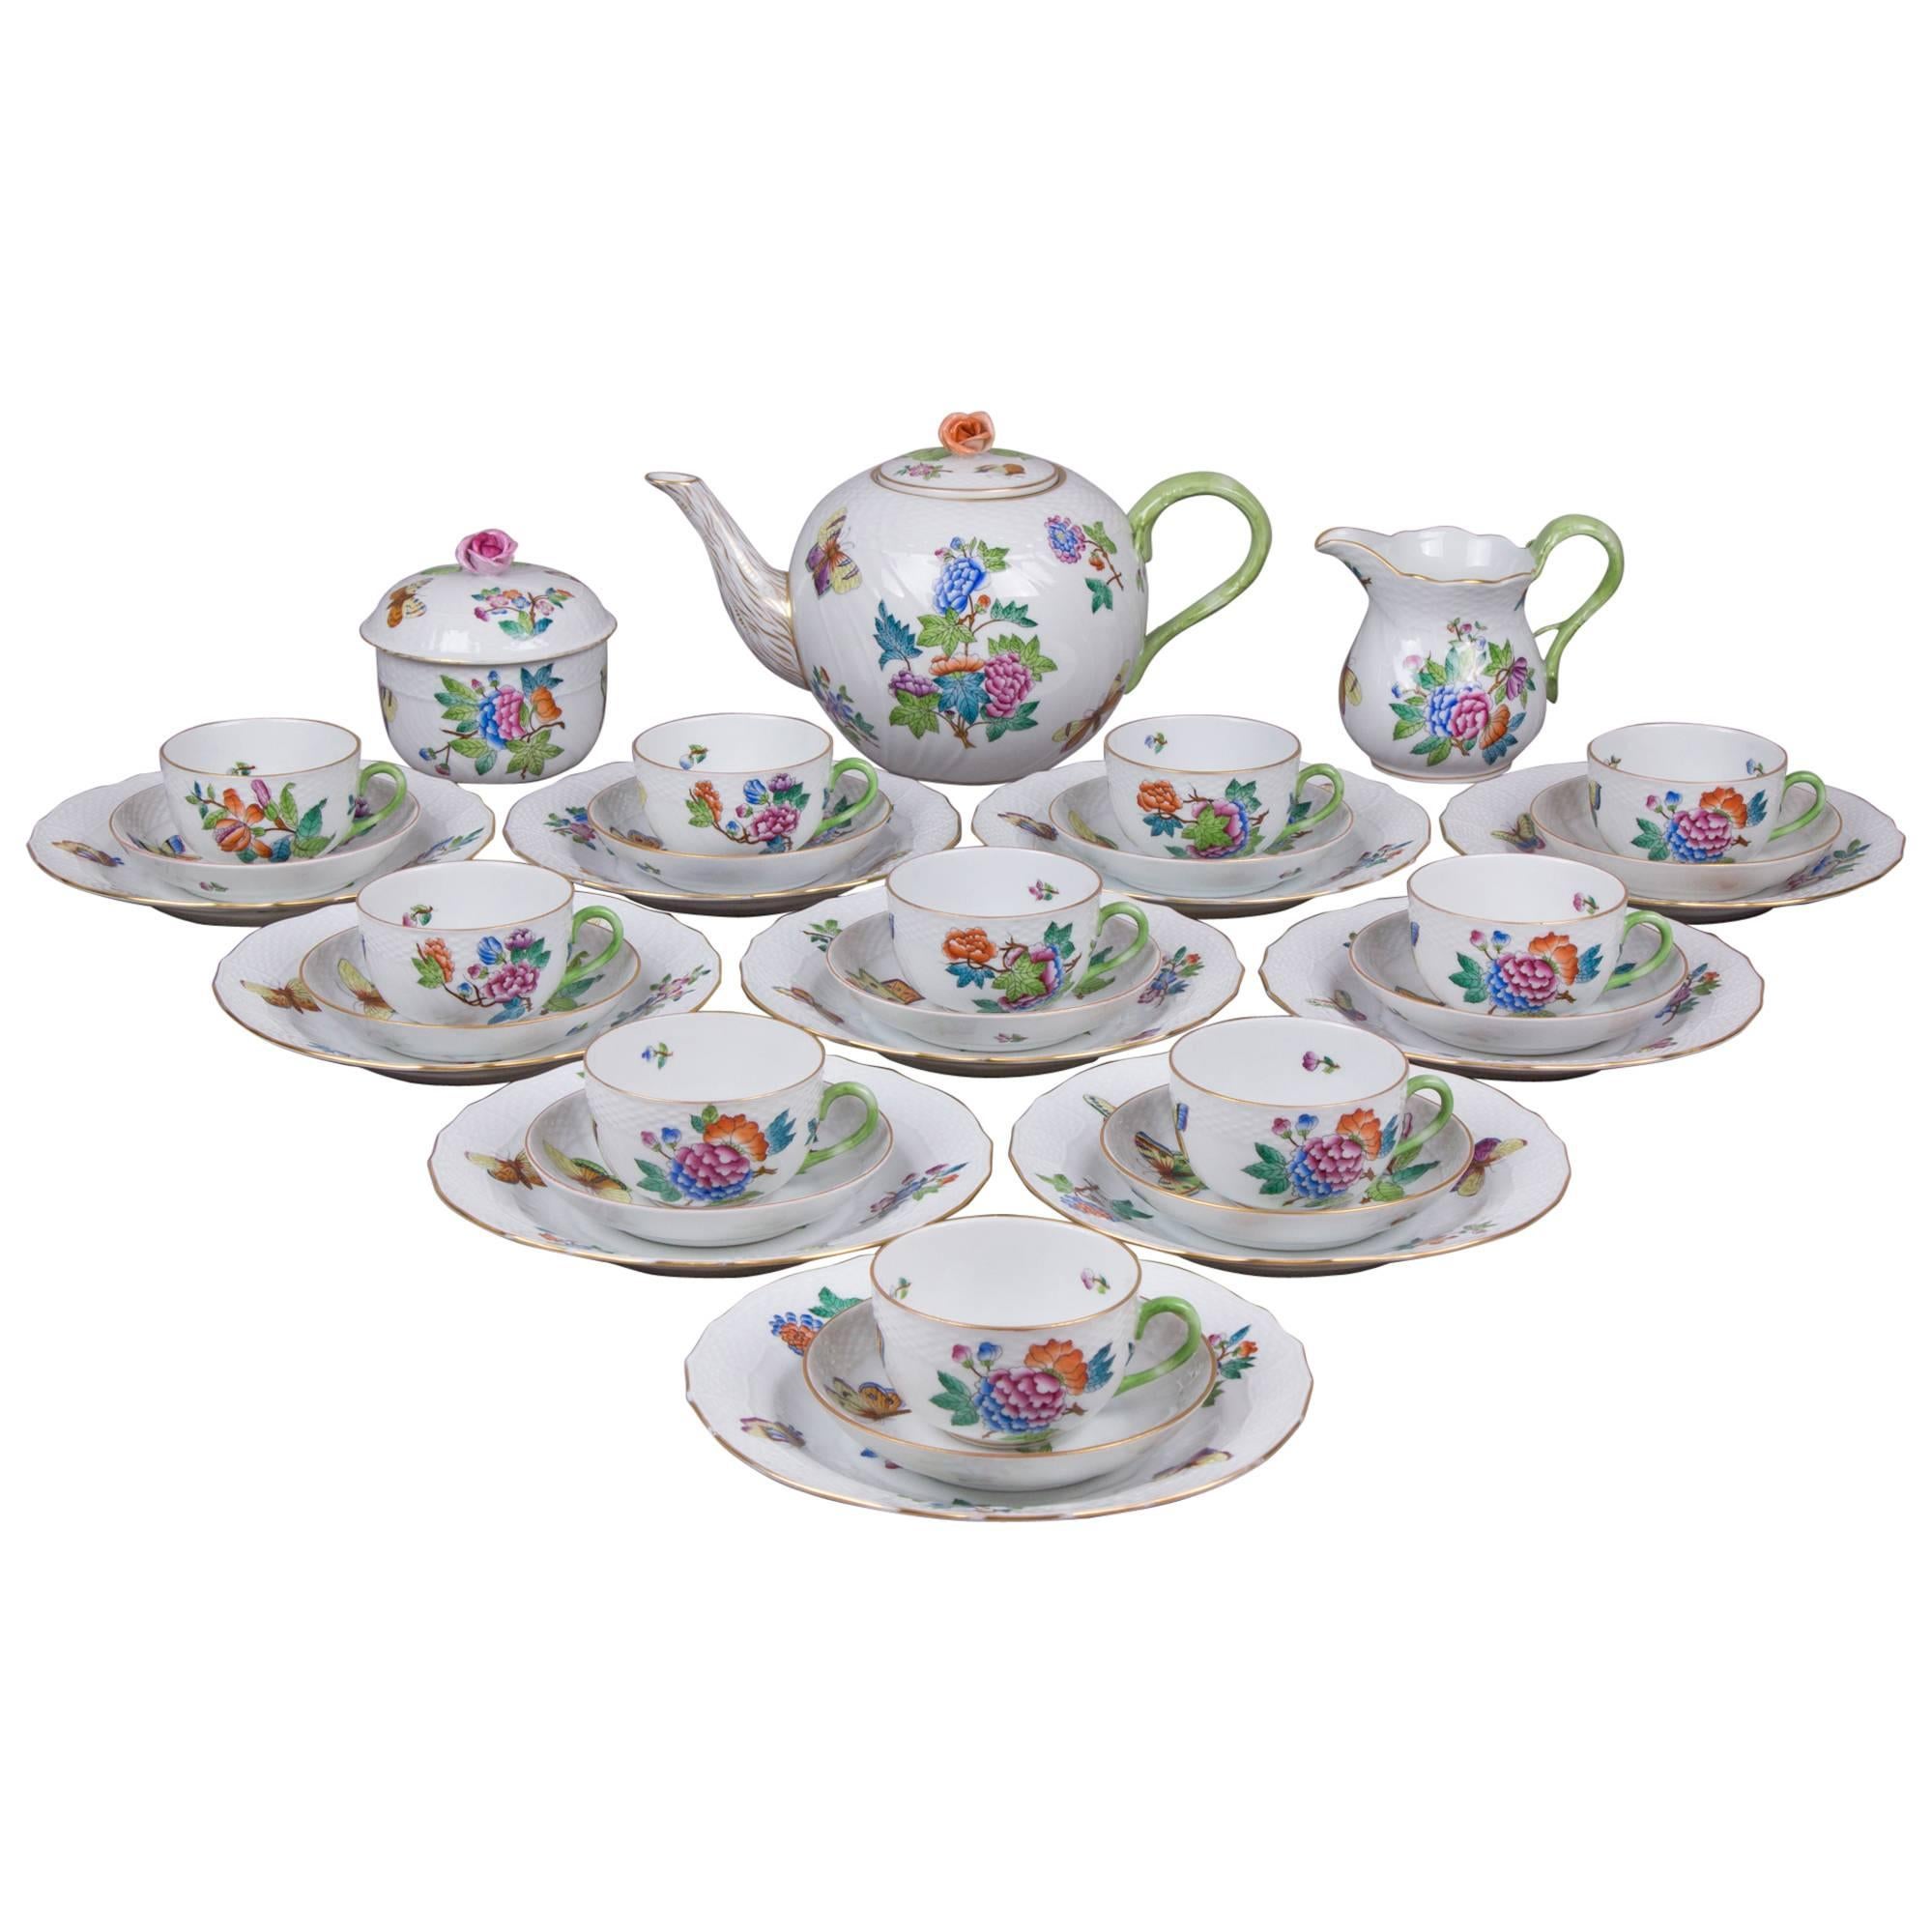 Herend Queen Victoria Tea and Dessert Set for Ten Persons, from 1942